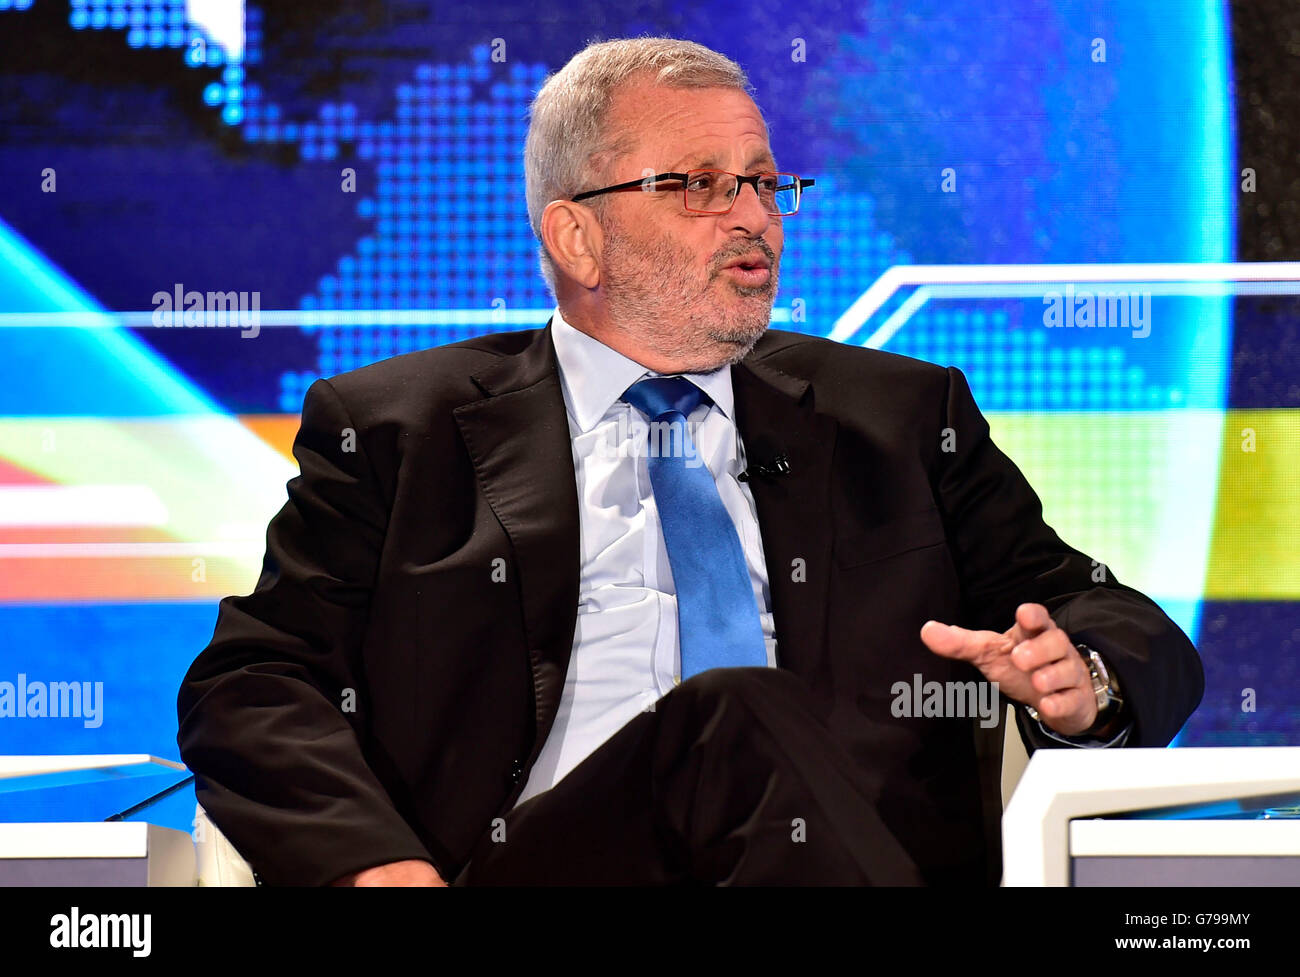 Tianjin, China. 26th June, 2016. Yitzhak Peterburg, chairman of the Board of Directors of Teva Pharmaceutical Industries Ltd., speaks during a session named 'Technology Tipping Points: Digital Ubiquity' of the Annual Meeting of the New Champions 2016, or the Summer Davos Forum, in Tianjin, north China, June 26, 2016. Credit:  Yue Yuewei/Xinhua/Alamy Live News Stock Photo